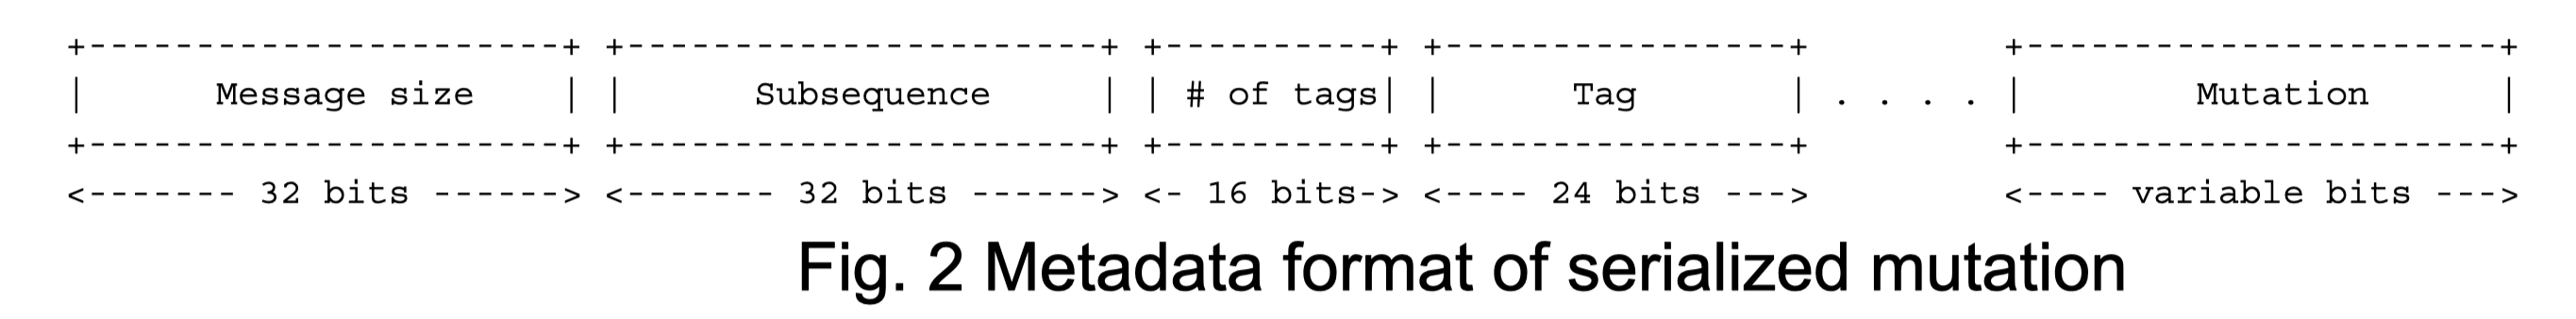 _images/serialized_mutation_metadata_format.png